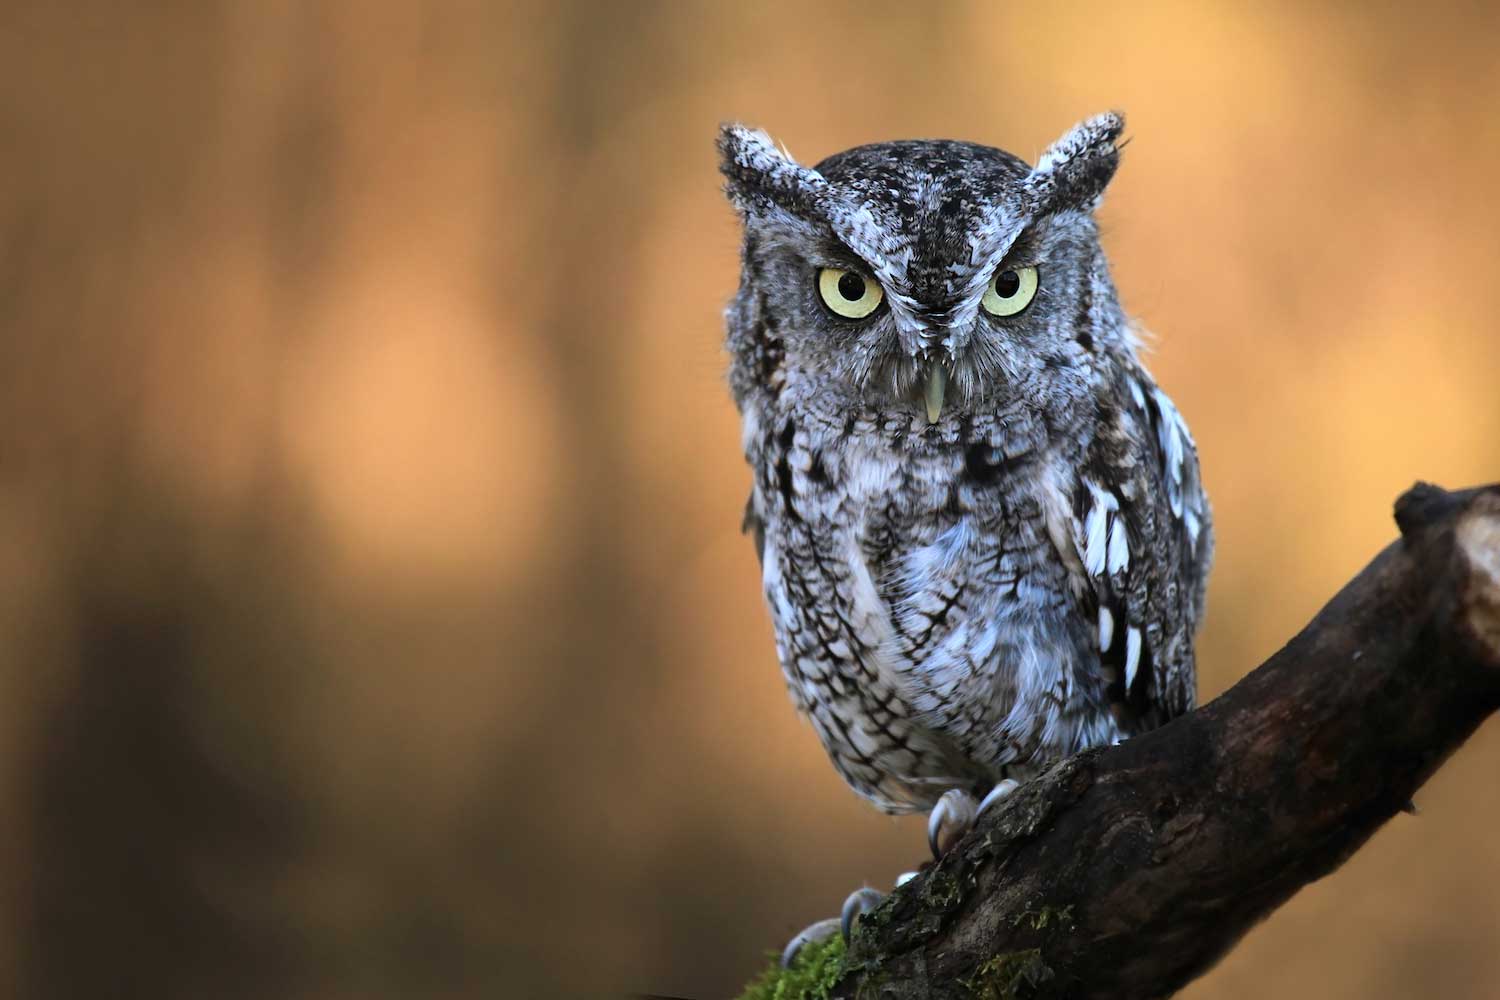 An eastern screech owl perched on a branch